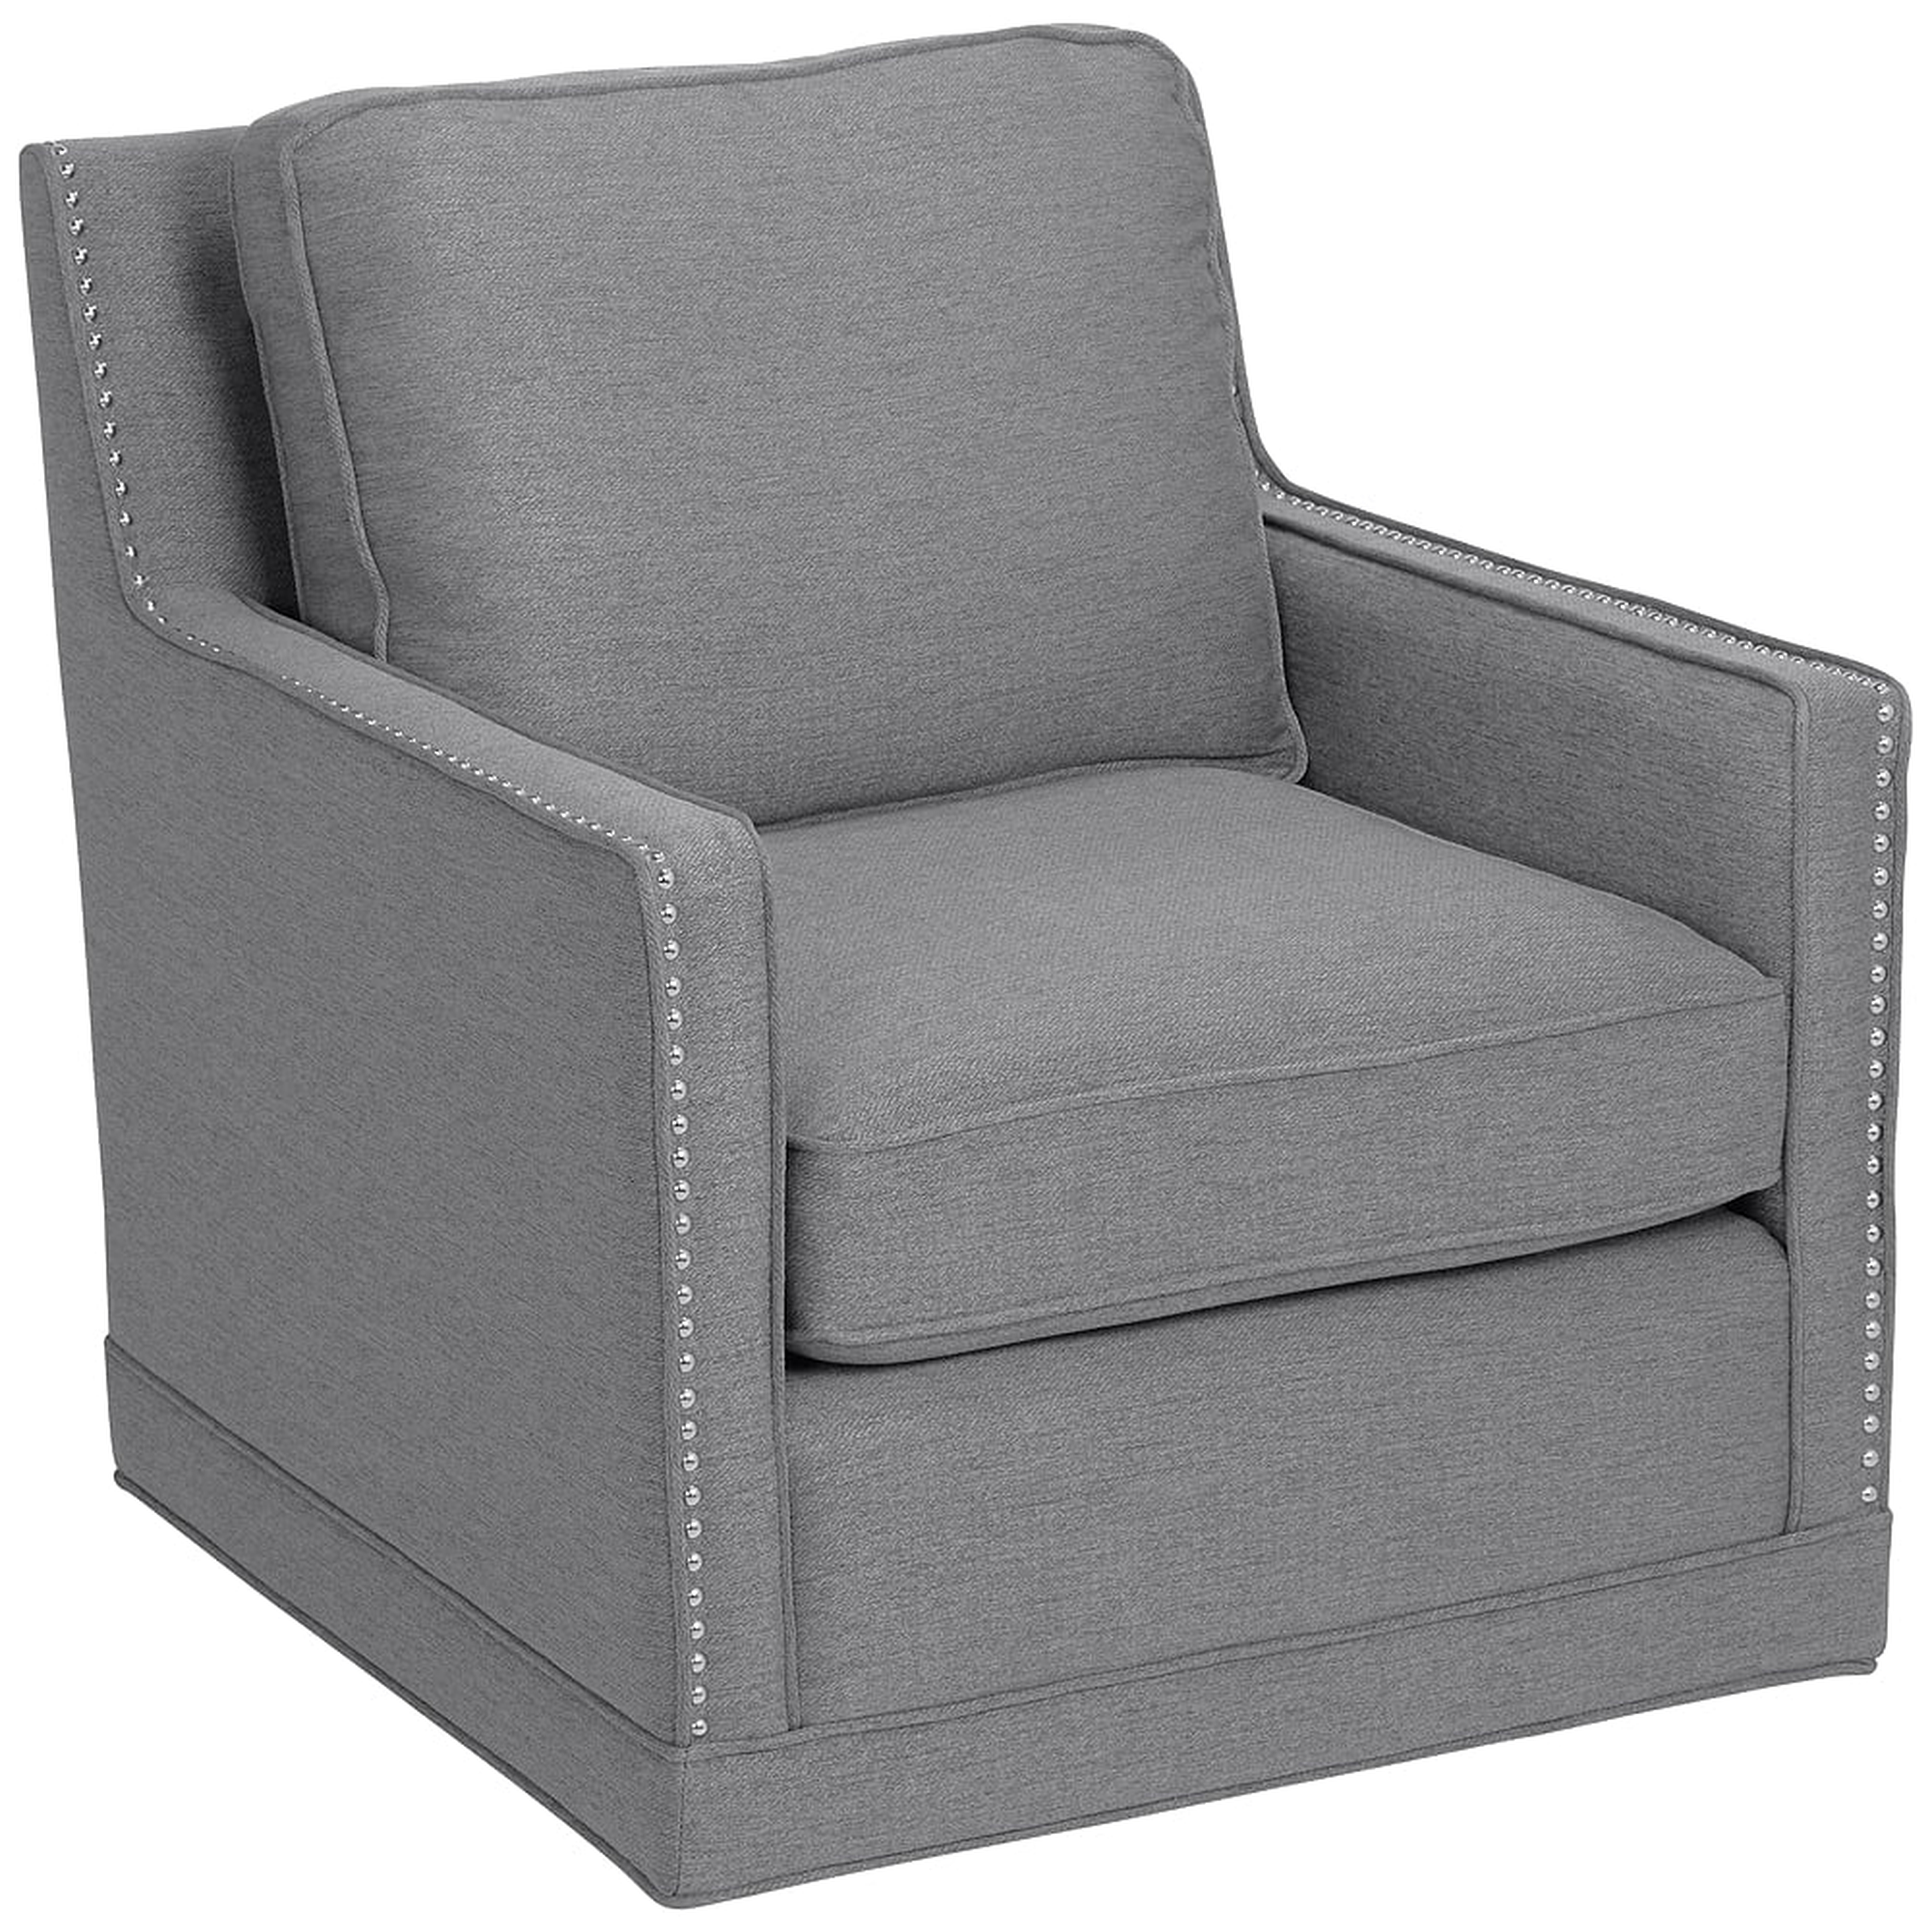 Clinton Mica Gray Linen Fabric Swivel Chair - Style # 21P46 - Lamps Plus